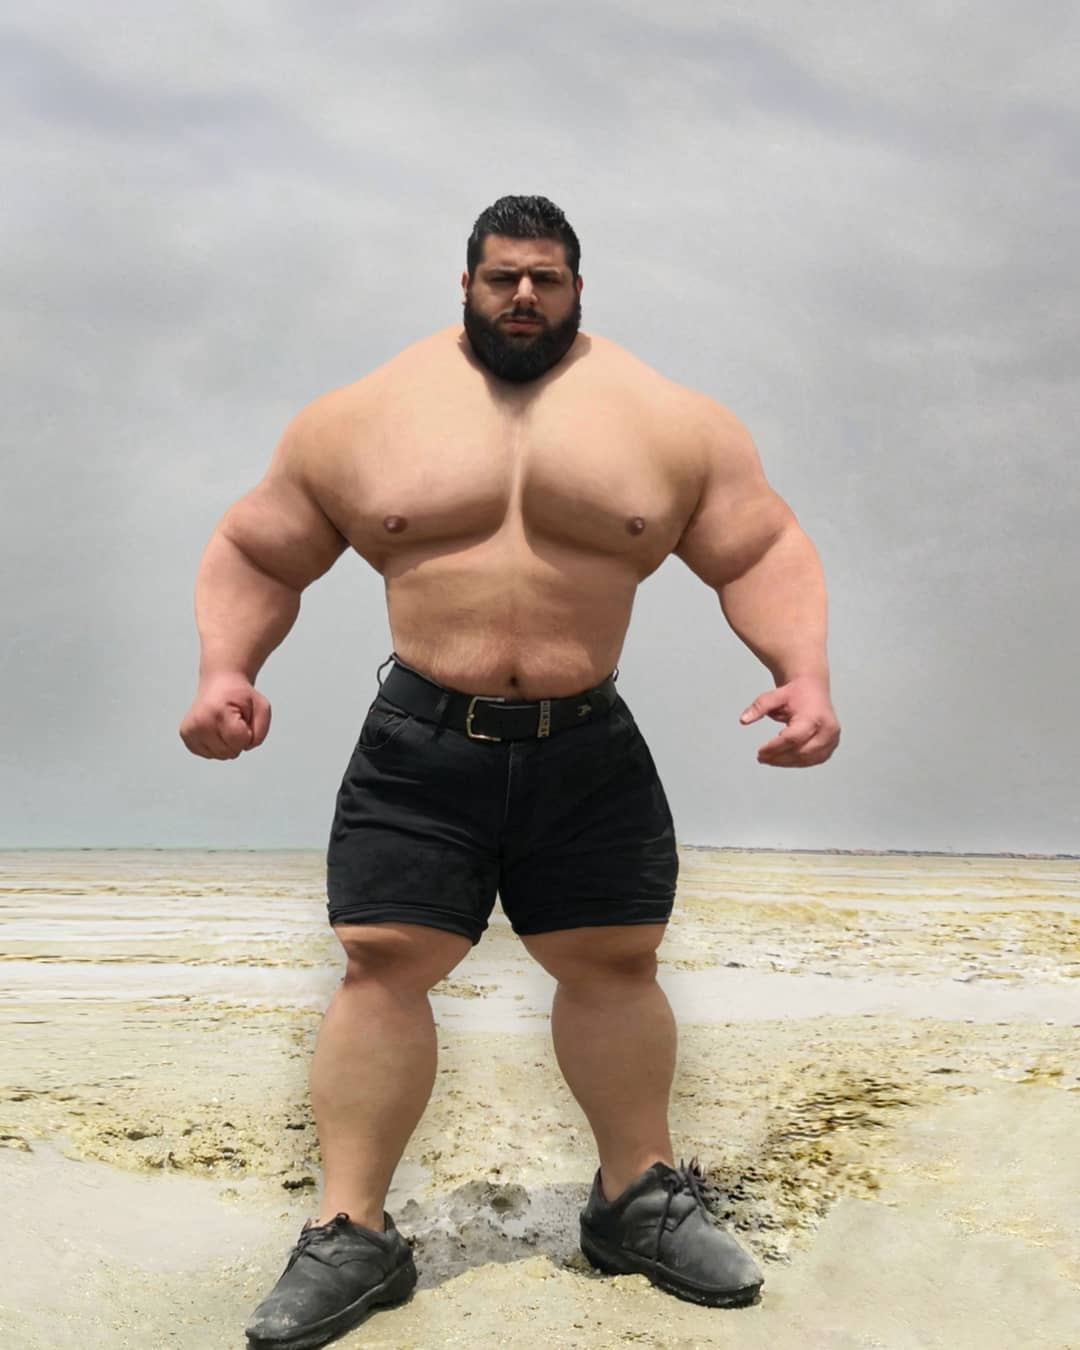 Sajad Gharibi, 'Iranian Hulk’ is called out by his monstrous Brazilian counterpart in a combined 44 STONE fight